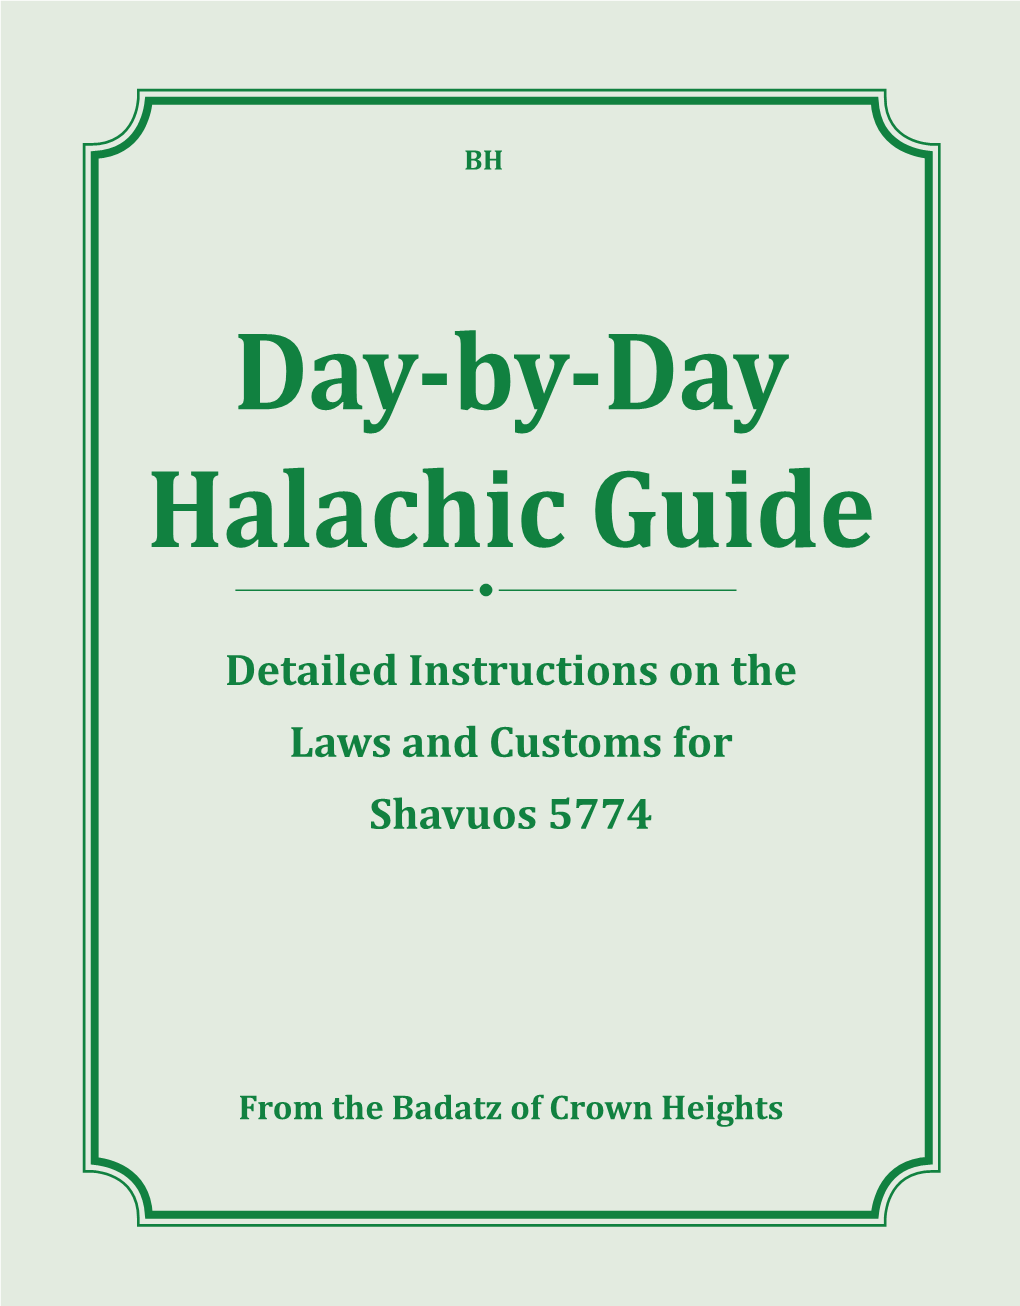 Detailed Instructions on the Laws and Customs for Shavuos 5774